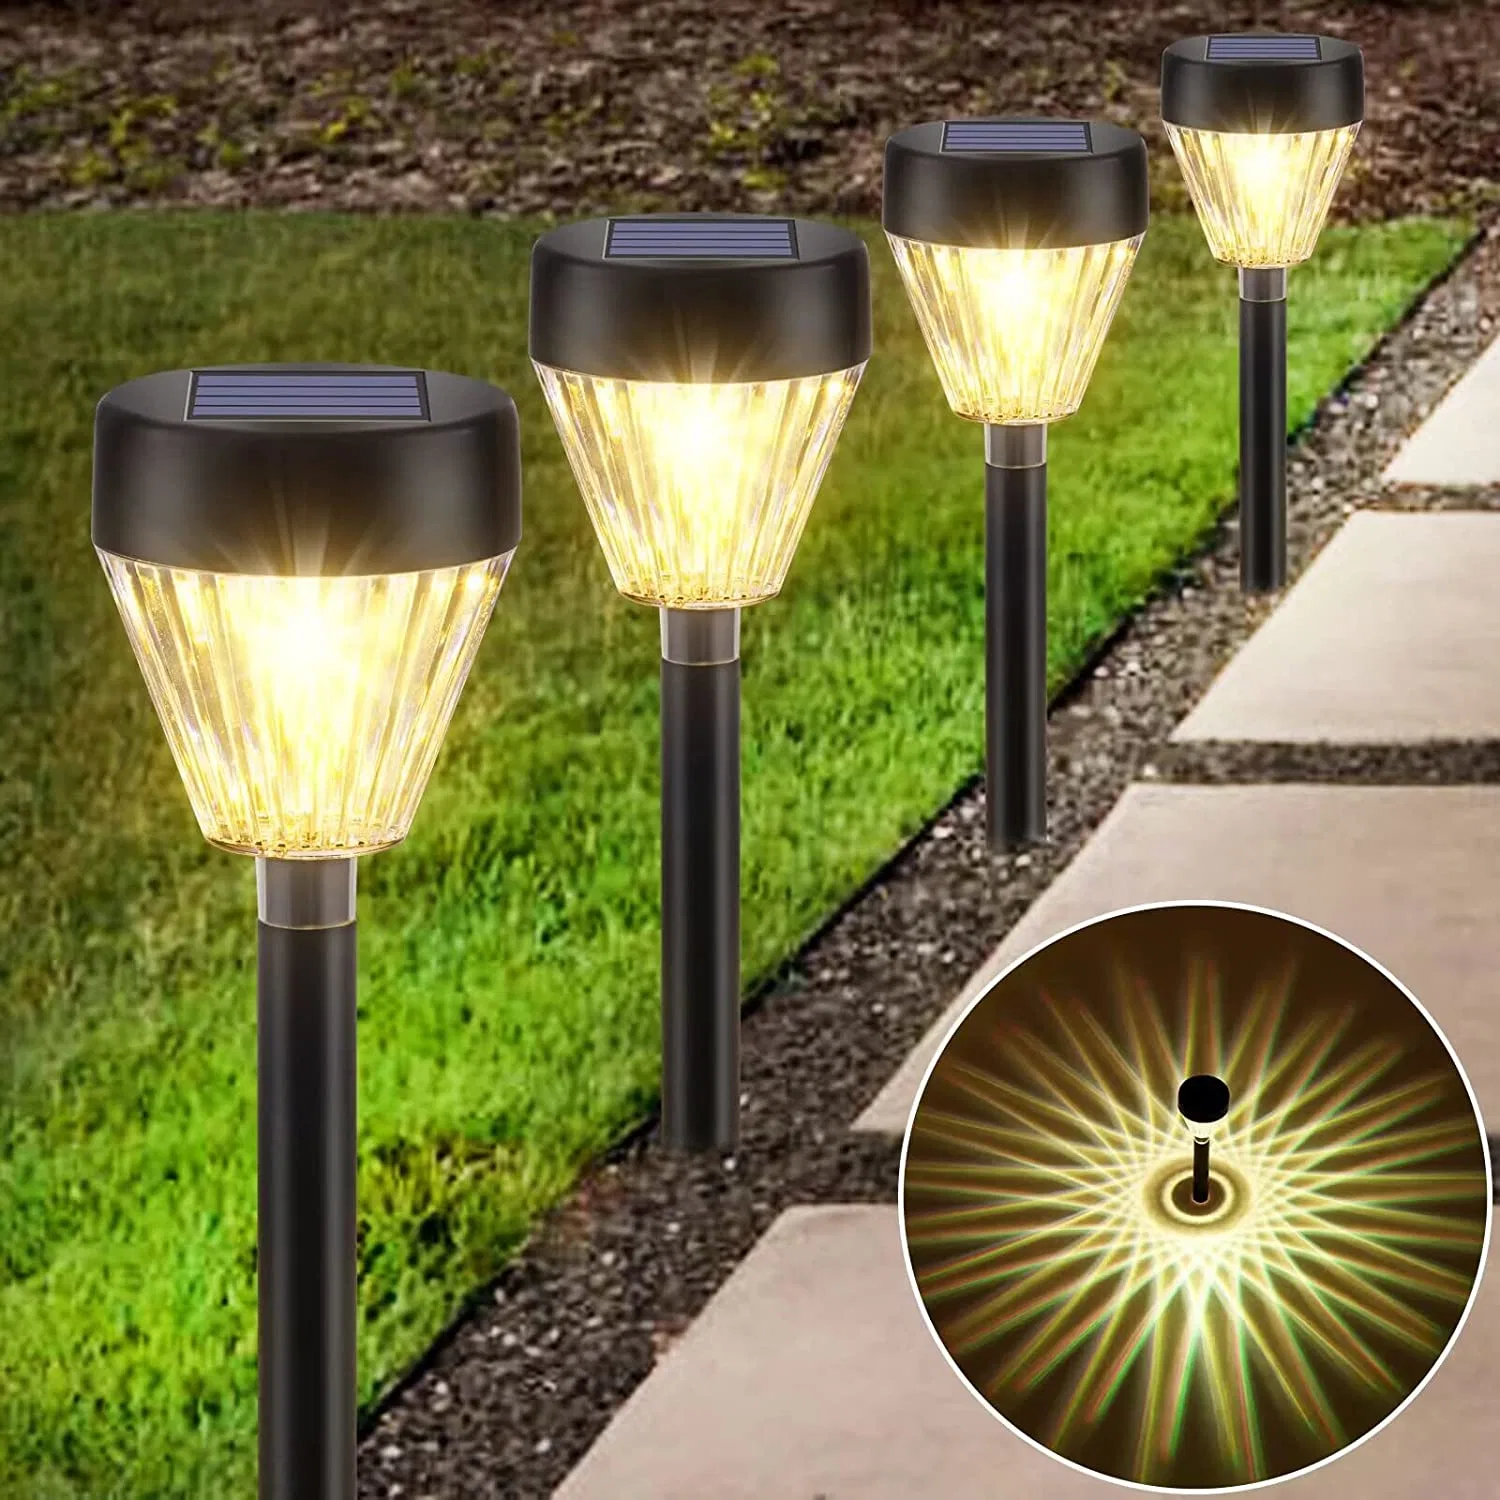 Newest High Quality Ground Spike Lamp Warm White Emitting Plastic Auto on/off LED Solar Outdoor Lights Pathway Lighting for Garden Yard Patio Stake Solar Light